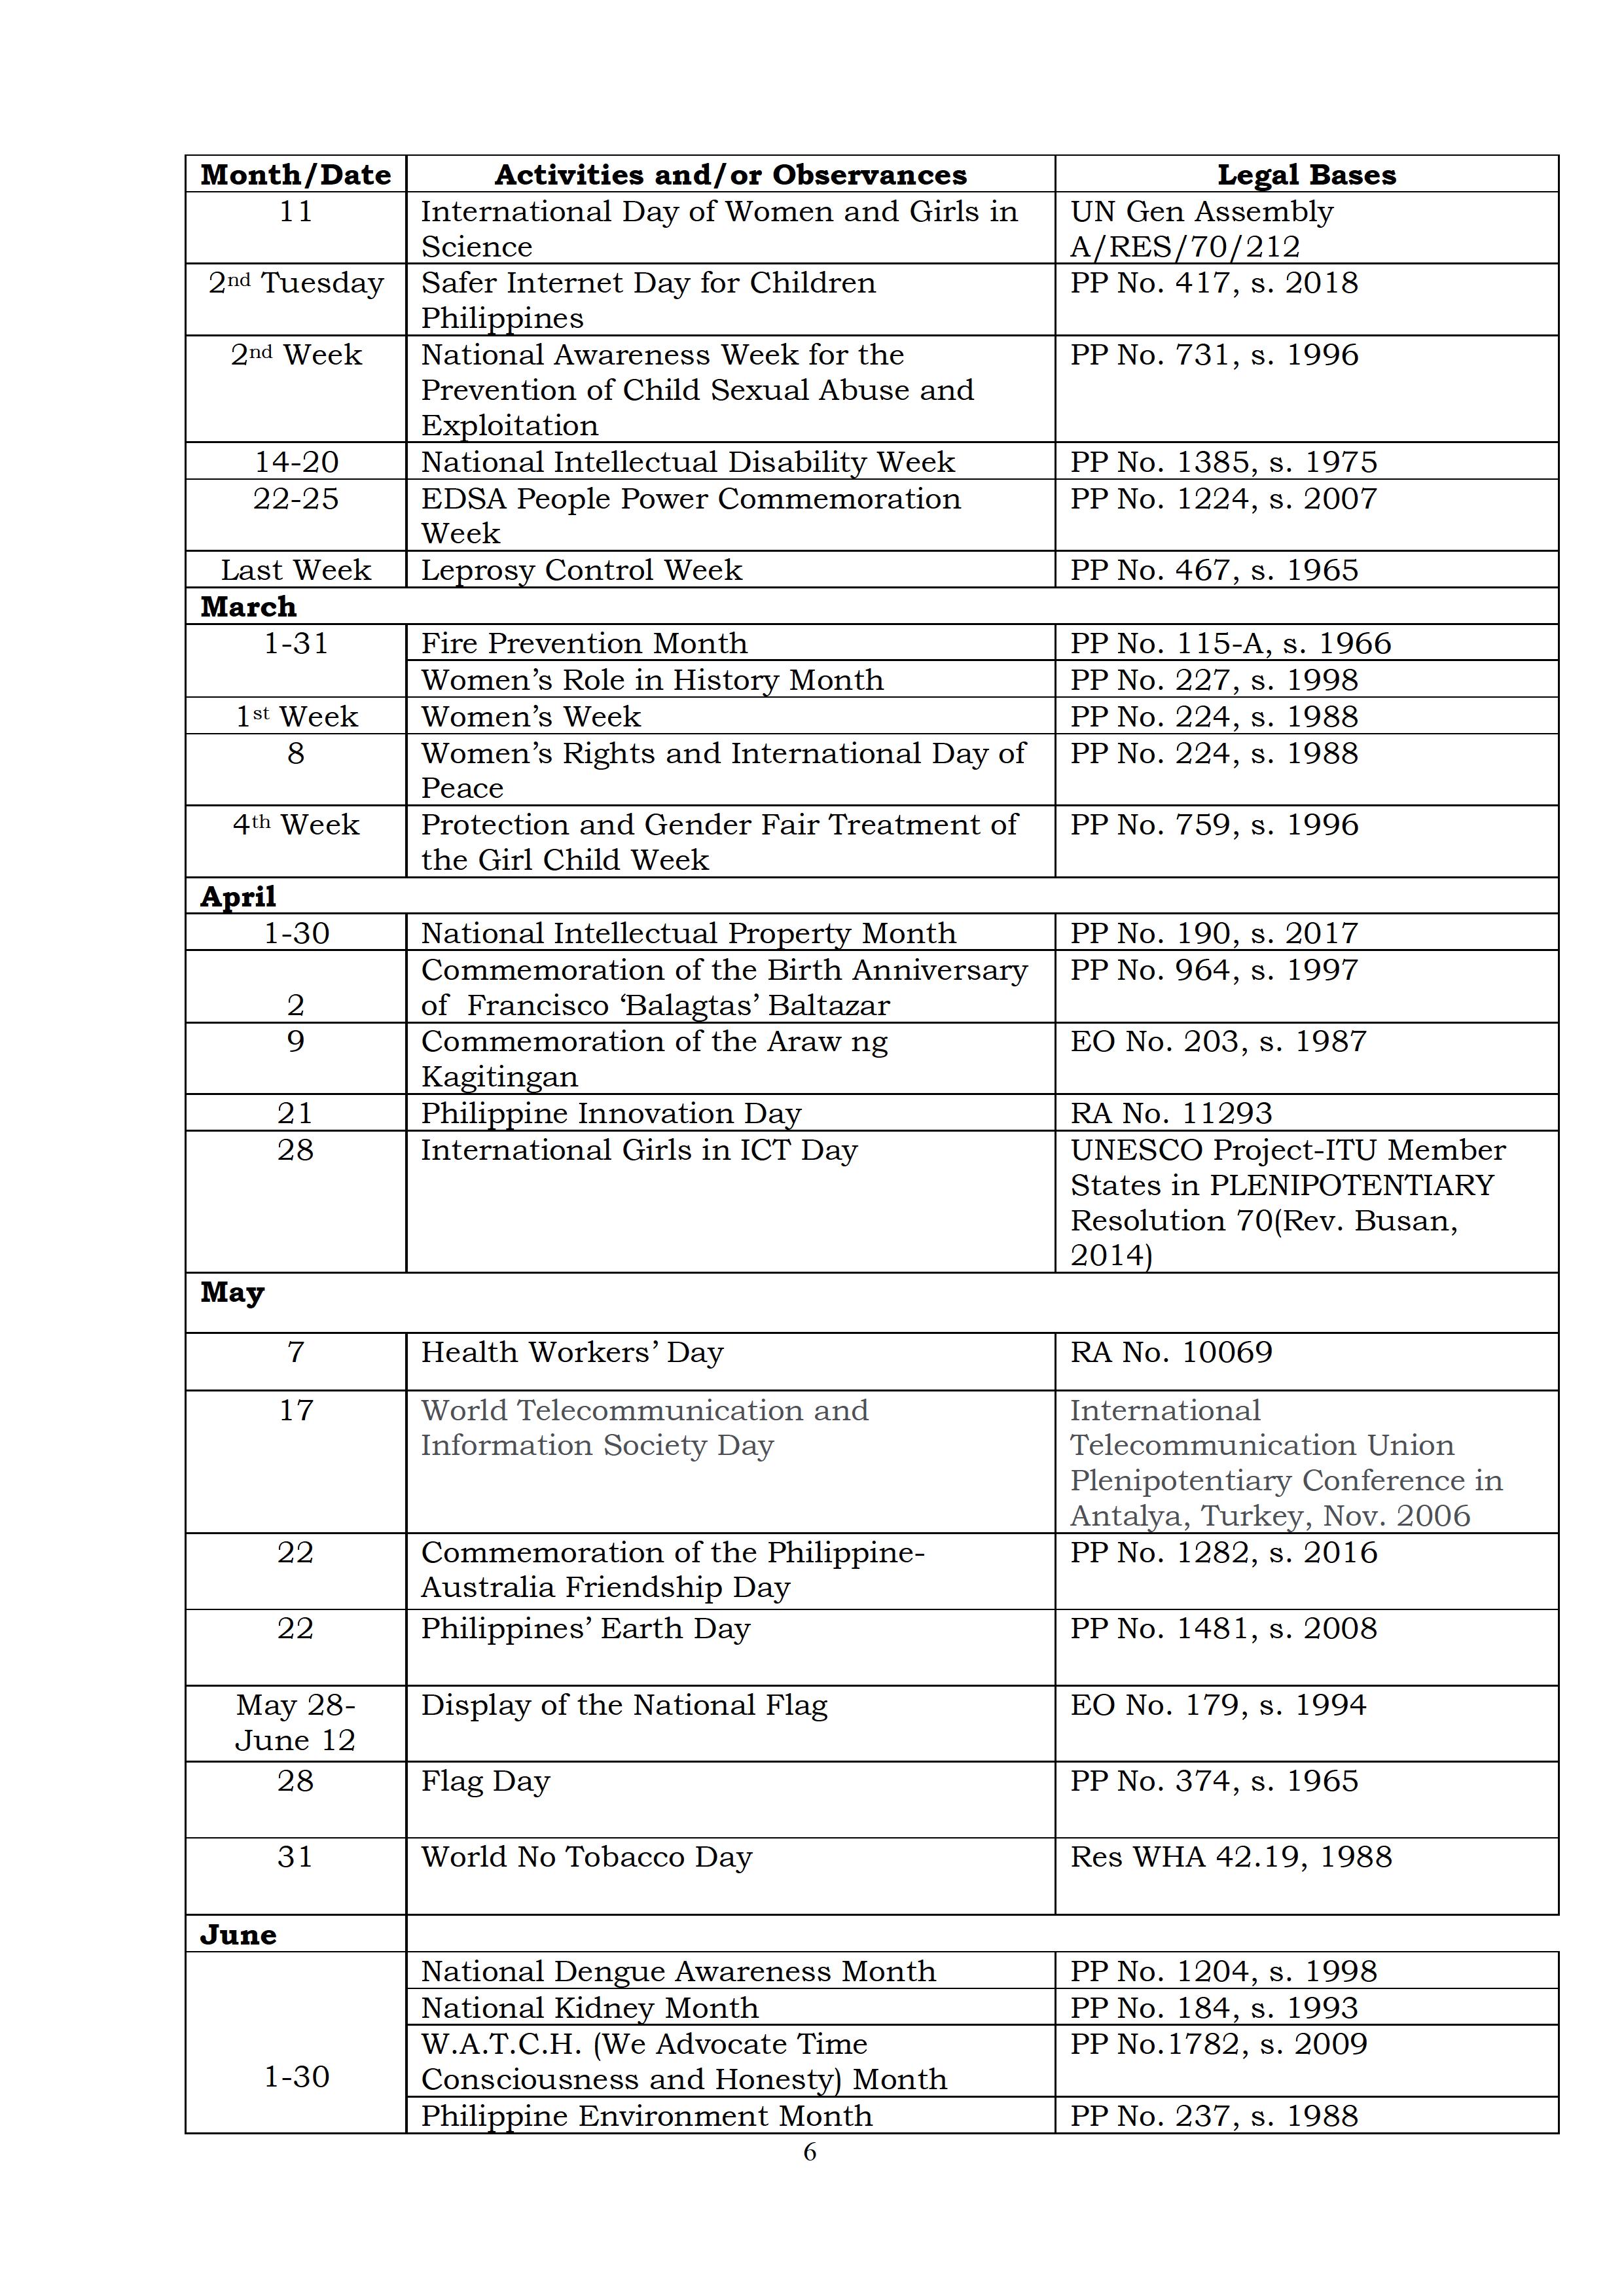 DepEd Career Guidance Activities, PTA Conferences and Cards Distribution Schedule